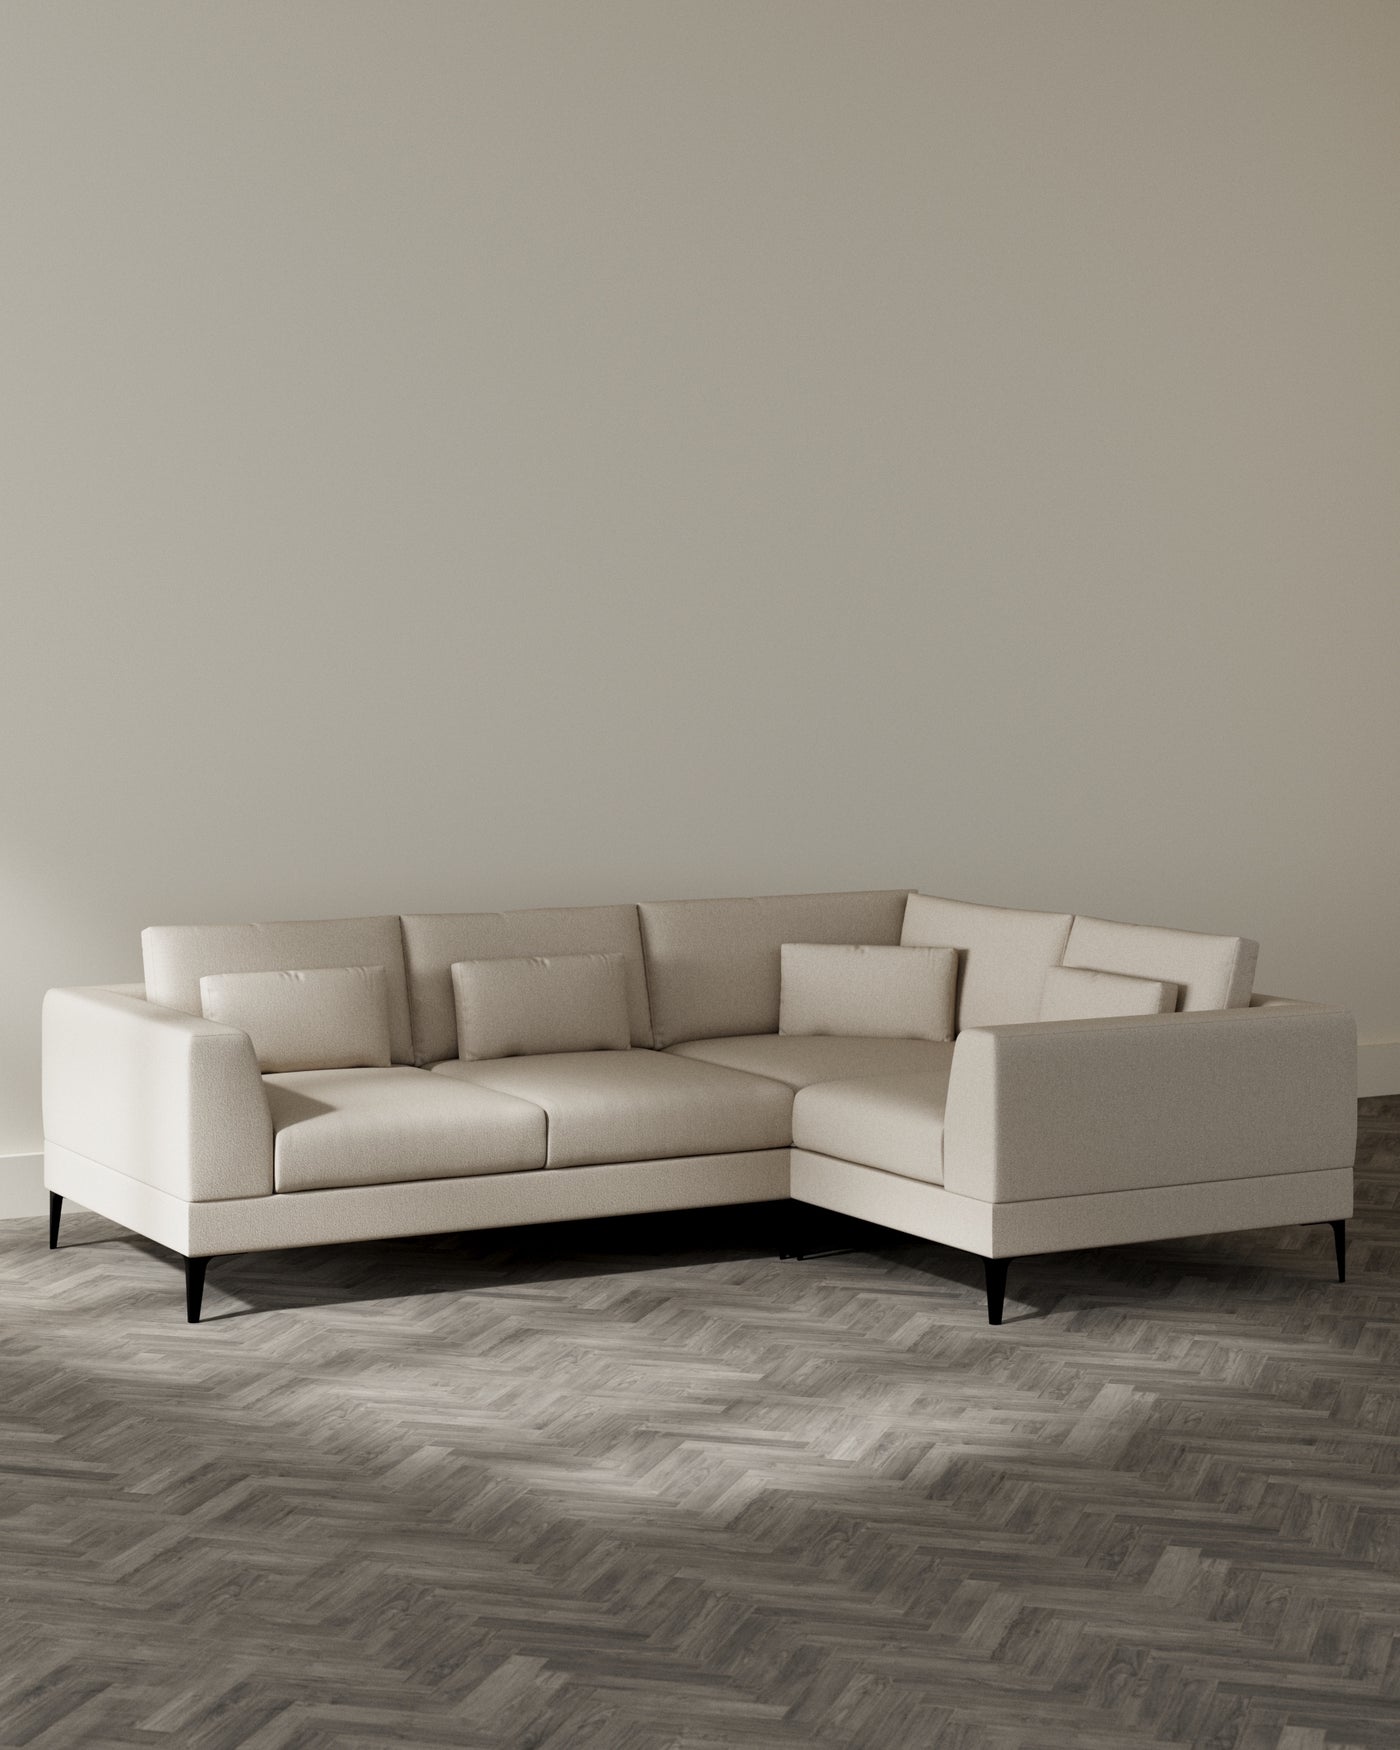 Elegant contemporary L-shaped sectional sofa with a clean-line design, featuring light beige upholstery and sleek black legs, set in a minimalist room with herringbone-patterned wooden flooring.